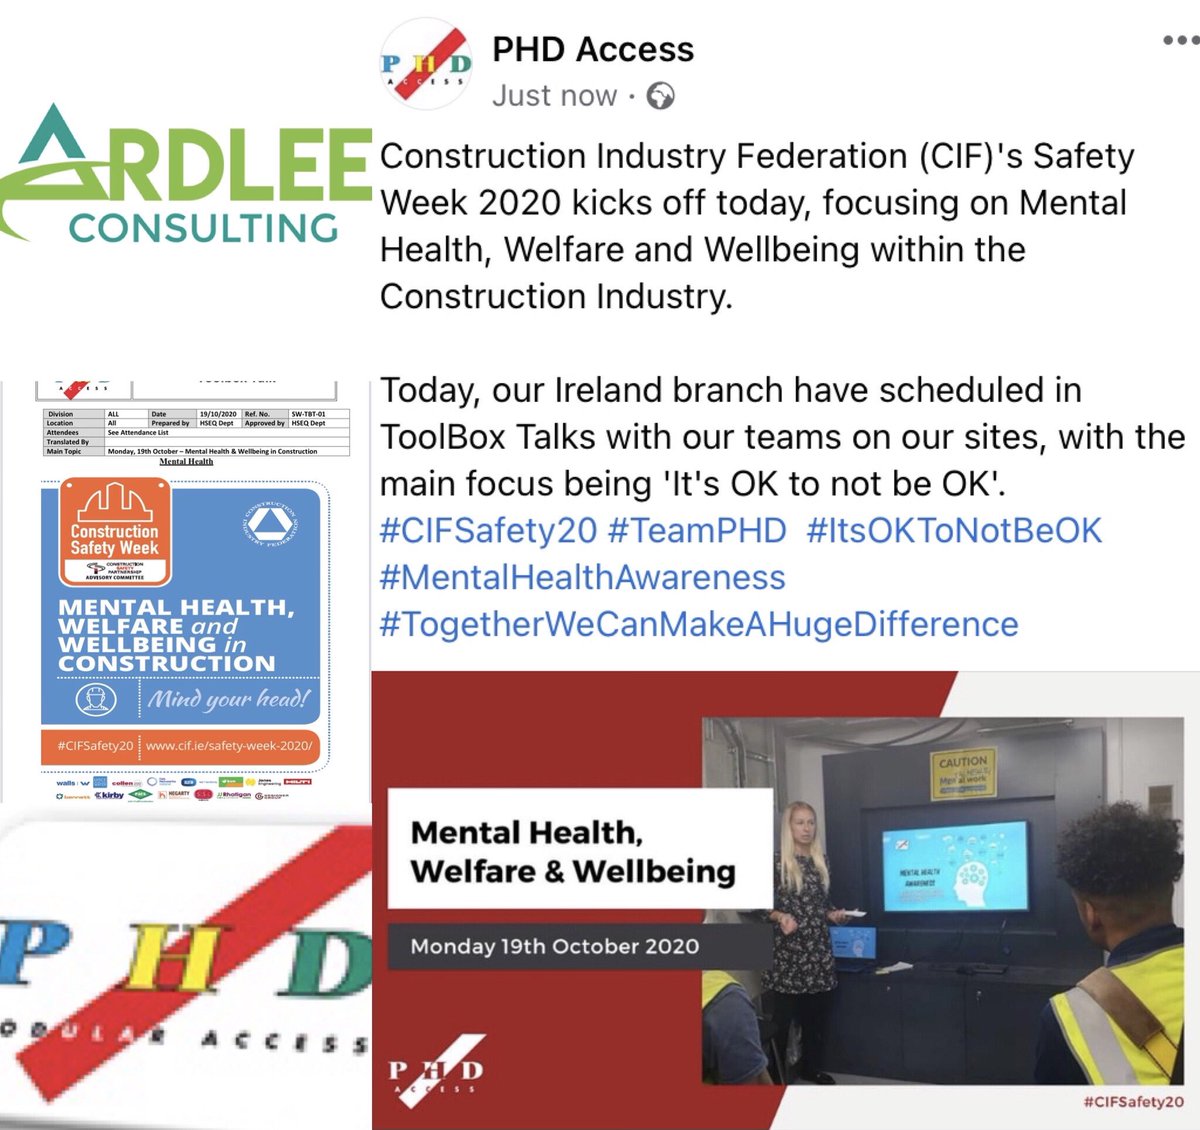 CIF Safety Week 2020 day 1 focusing on Mental Health, Welfare and Wellbeing within the Construction Industry

Today we held ToolBox Talks with the teams  on site, with the main focus being 'It's OK to not be OK'. 

#CIFSafety20 #TeamPHD  #ItsOKToNotBeOK #MentalHealthAwareness